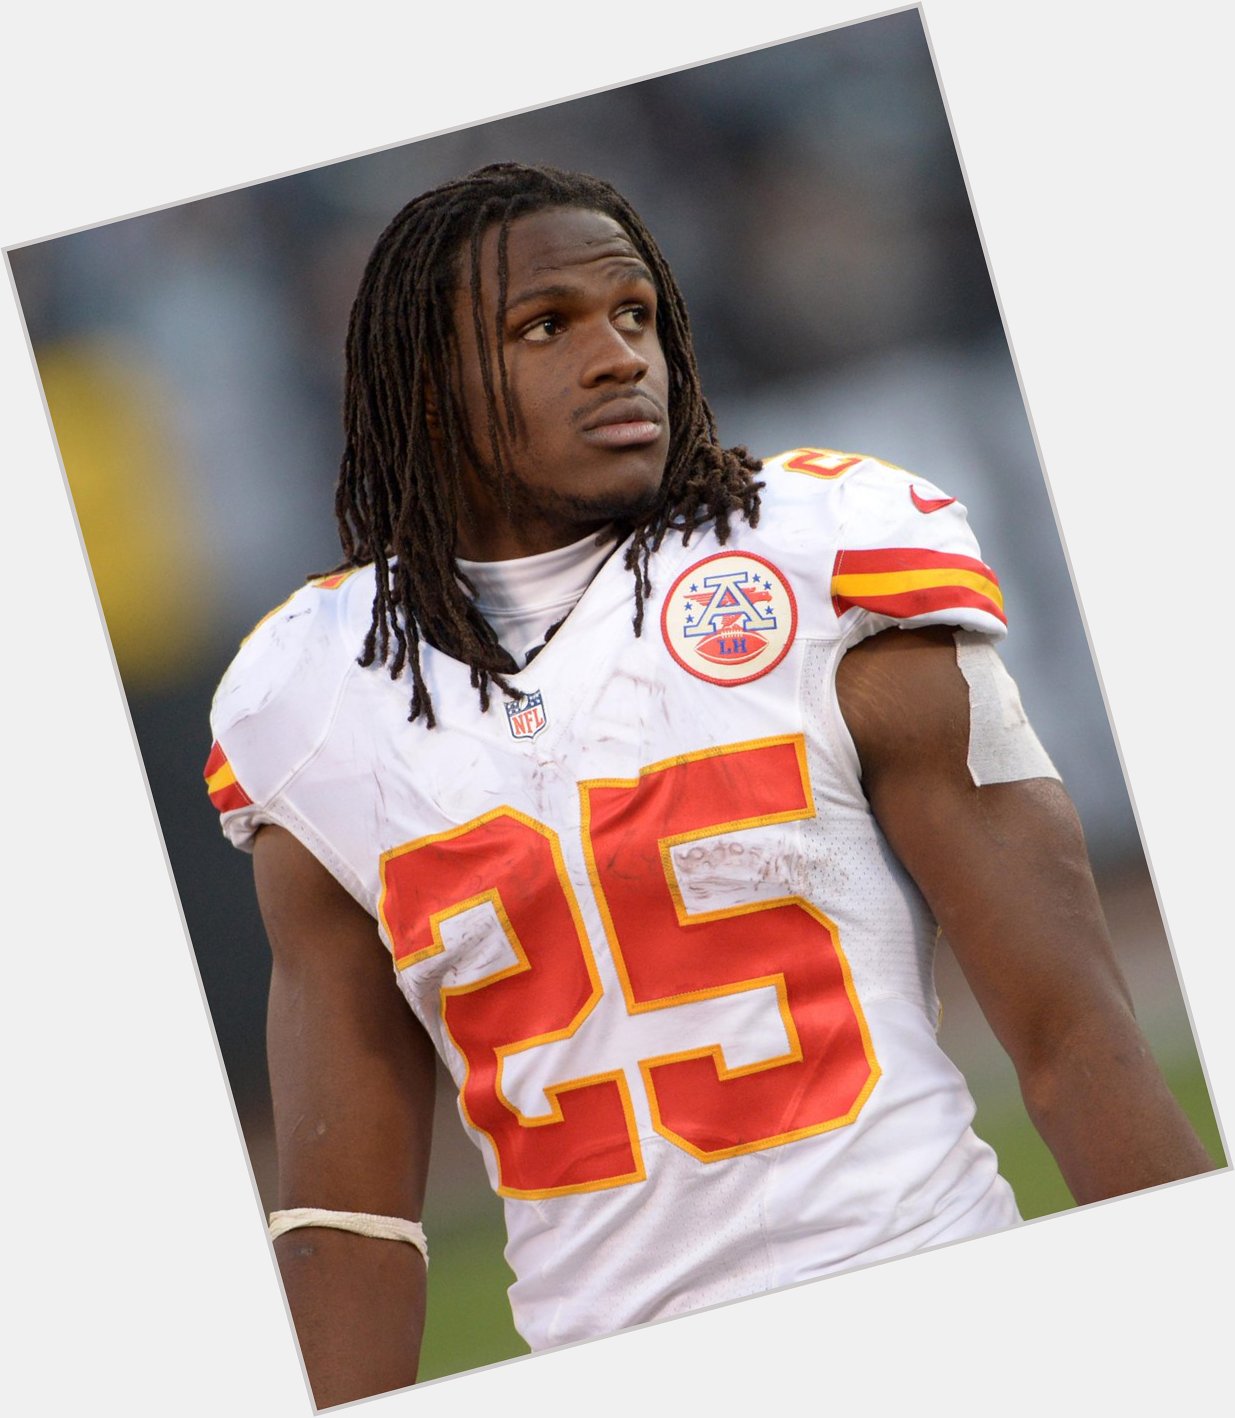 Happy 28th birthday to the one and only Jamaal Charles! Congratulations 